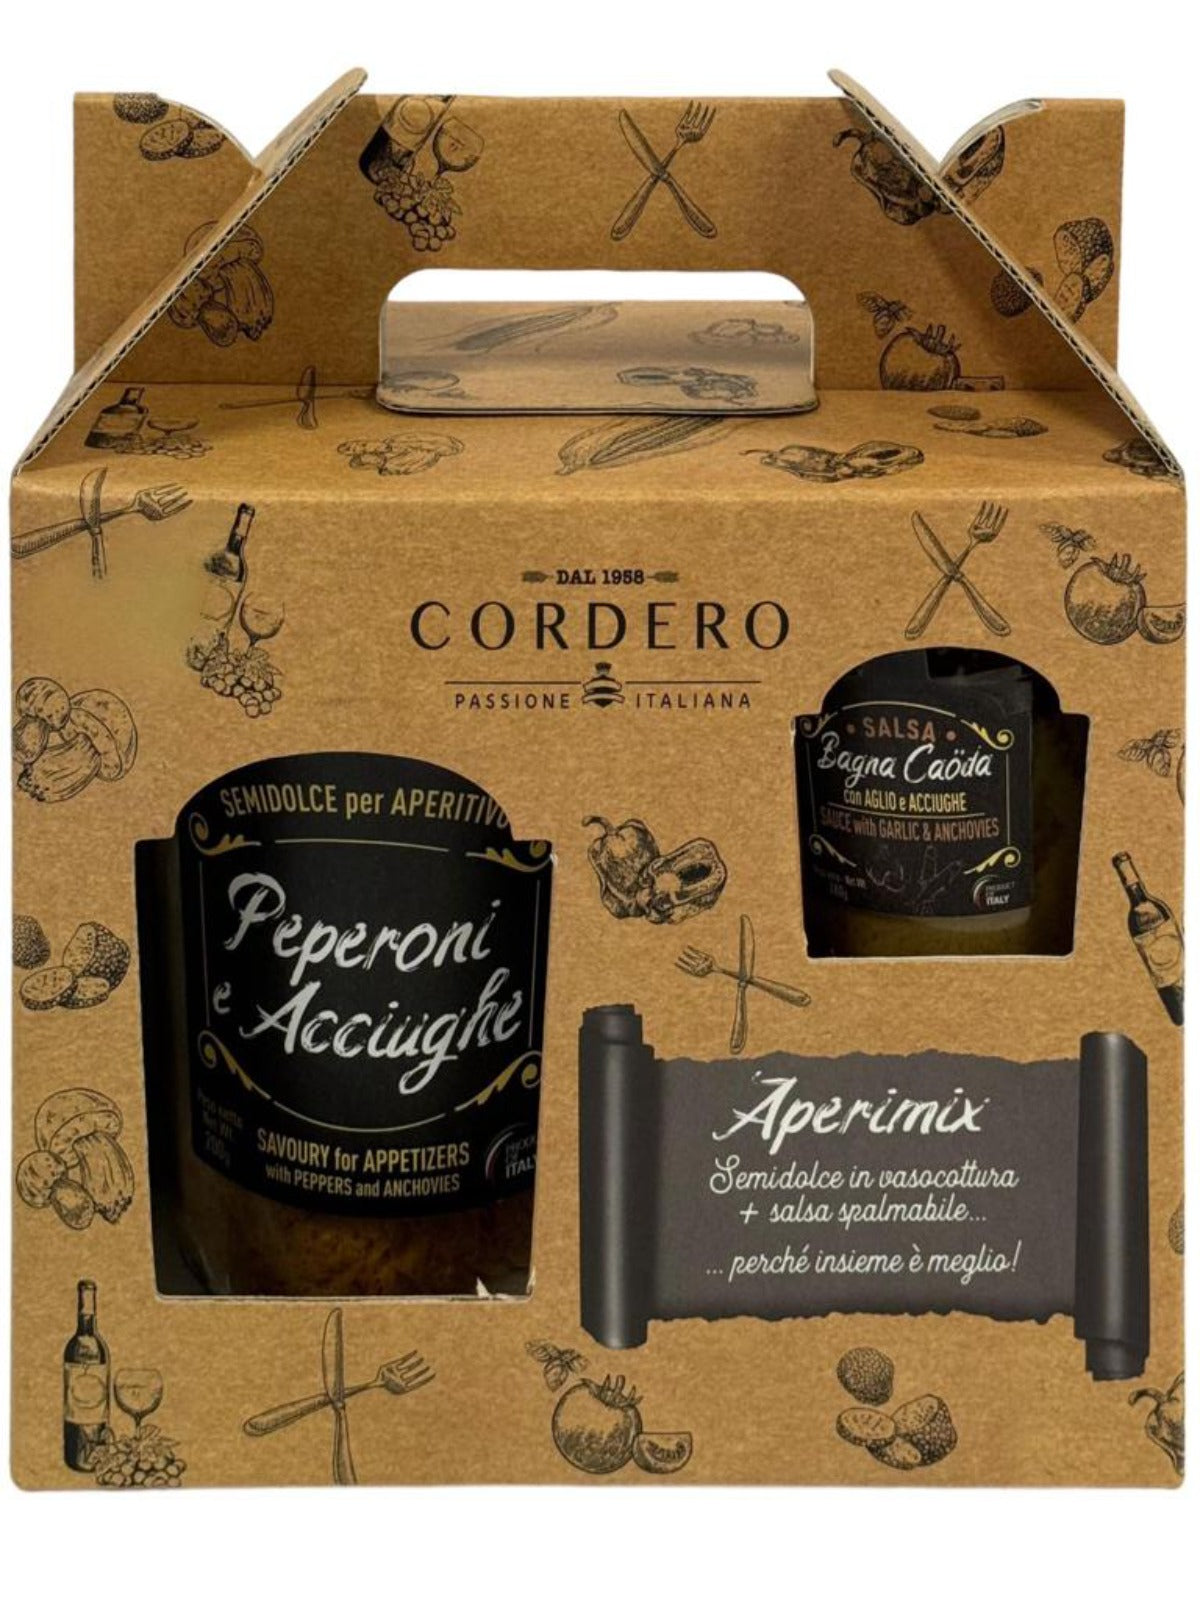 Cordero Panettone Italian Pepperoni and Anchovies Cake (200g) with Garlic and Anchovies Sauce (180g)